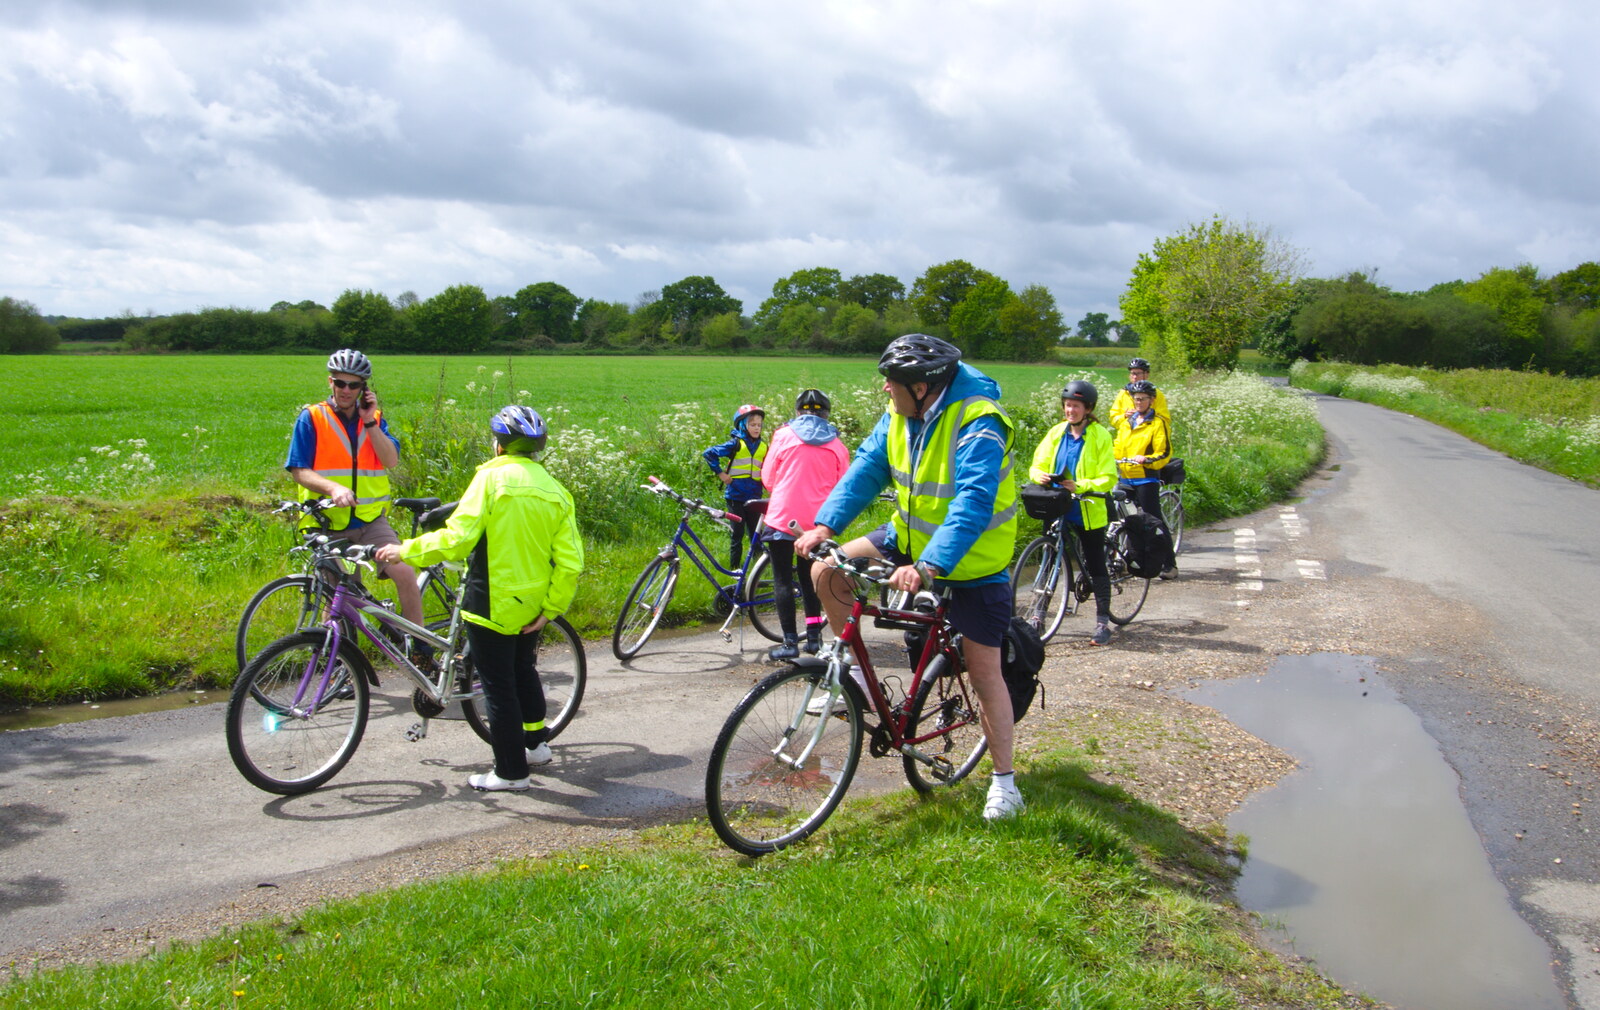 Paul's on the phone from The BSCC Bike Ride 2019, Coggeshall, Essex - 11th May 2019